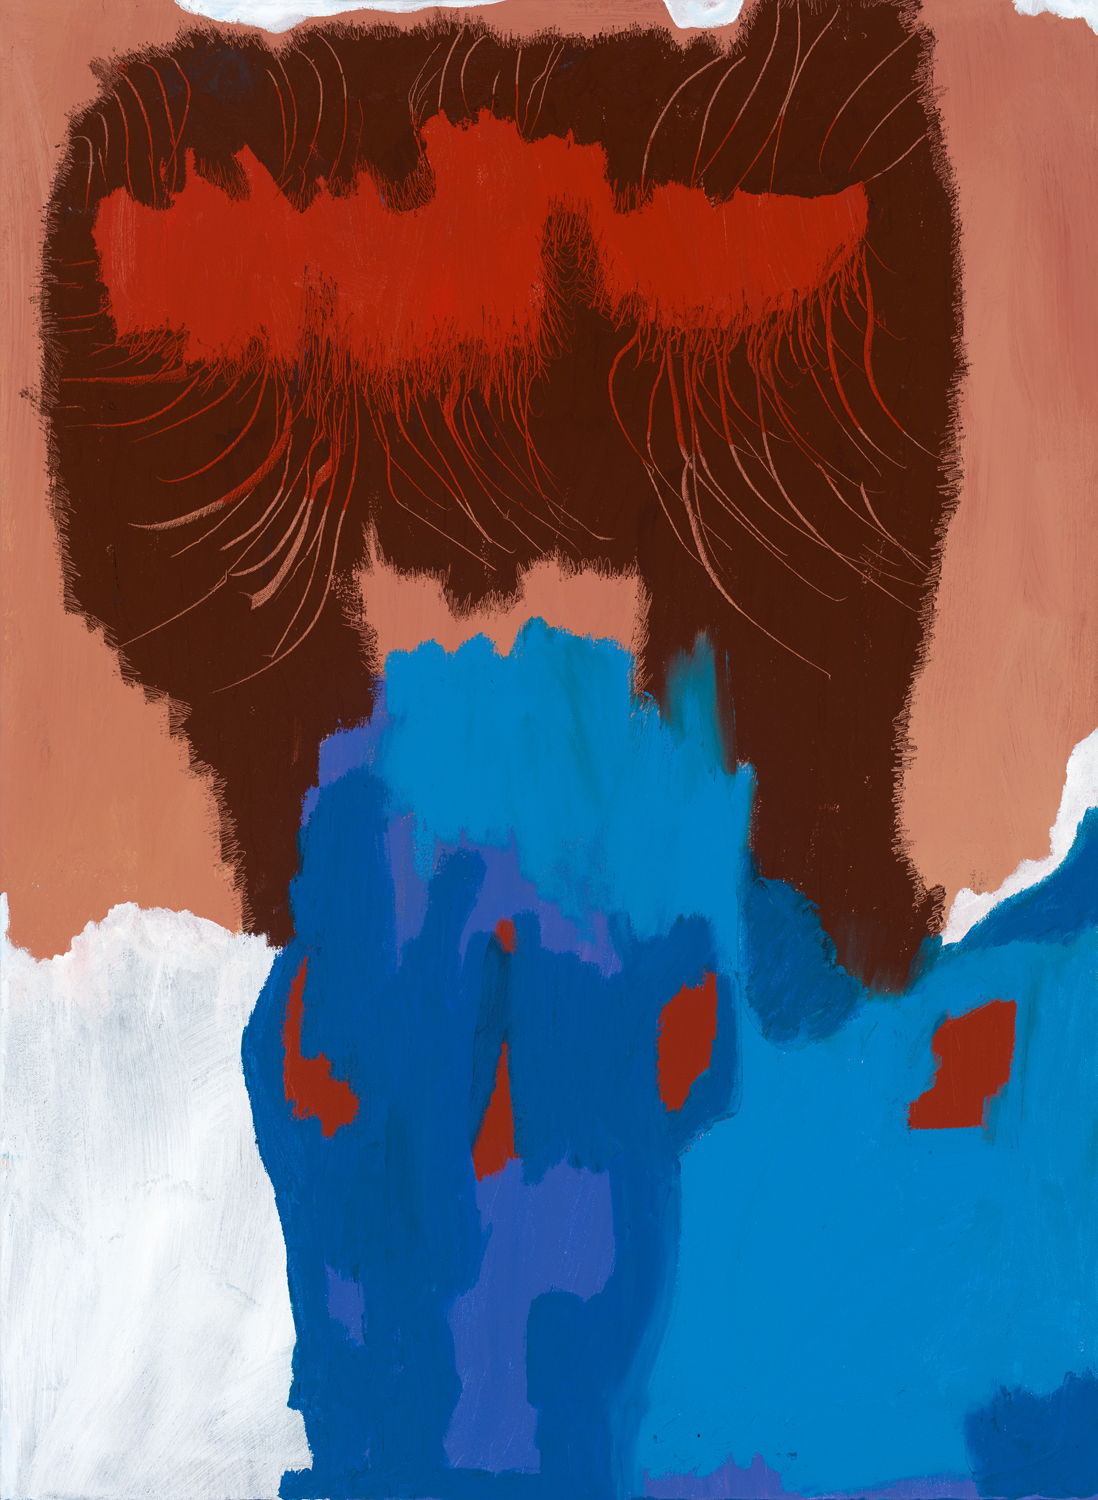 Red abstract figure on the top half. Blue on the bottom half, with red circles inside.